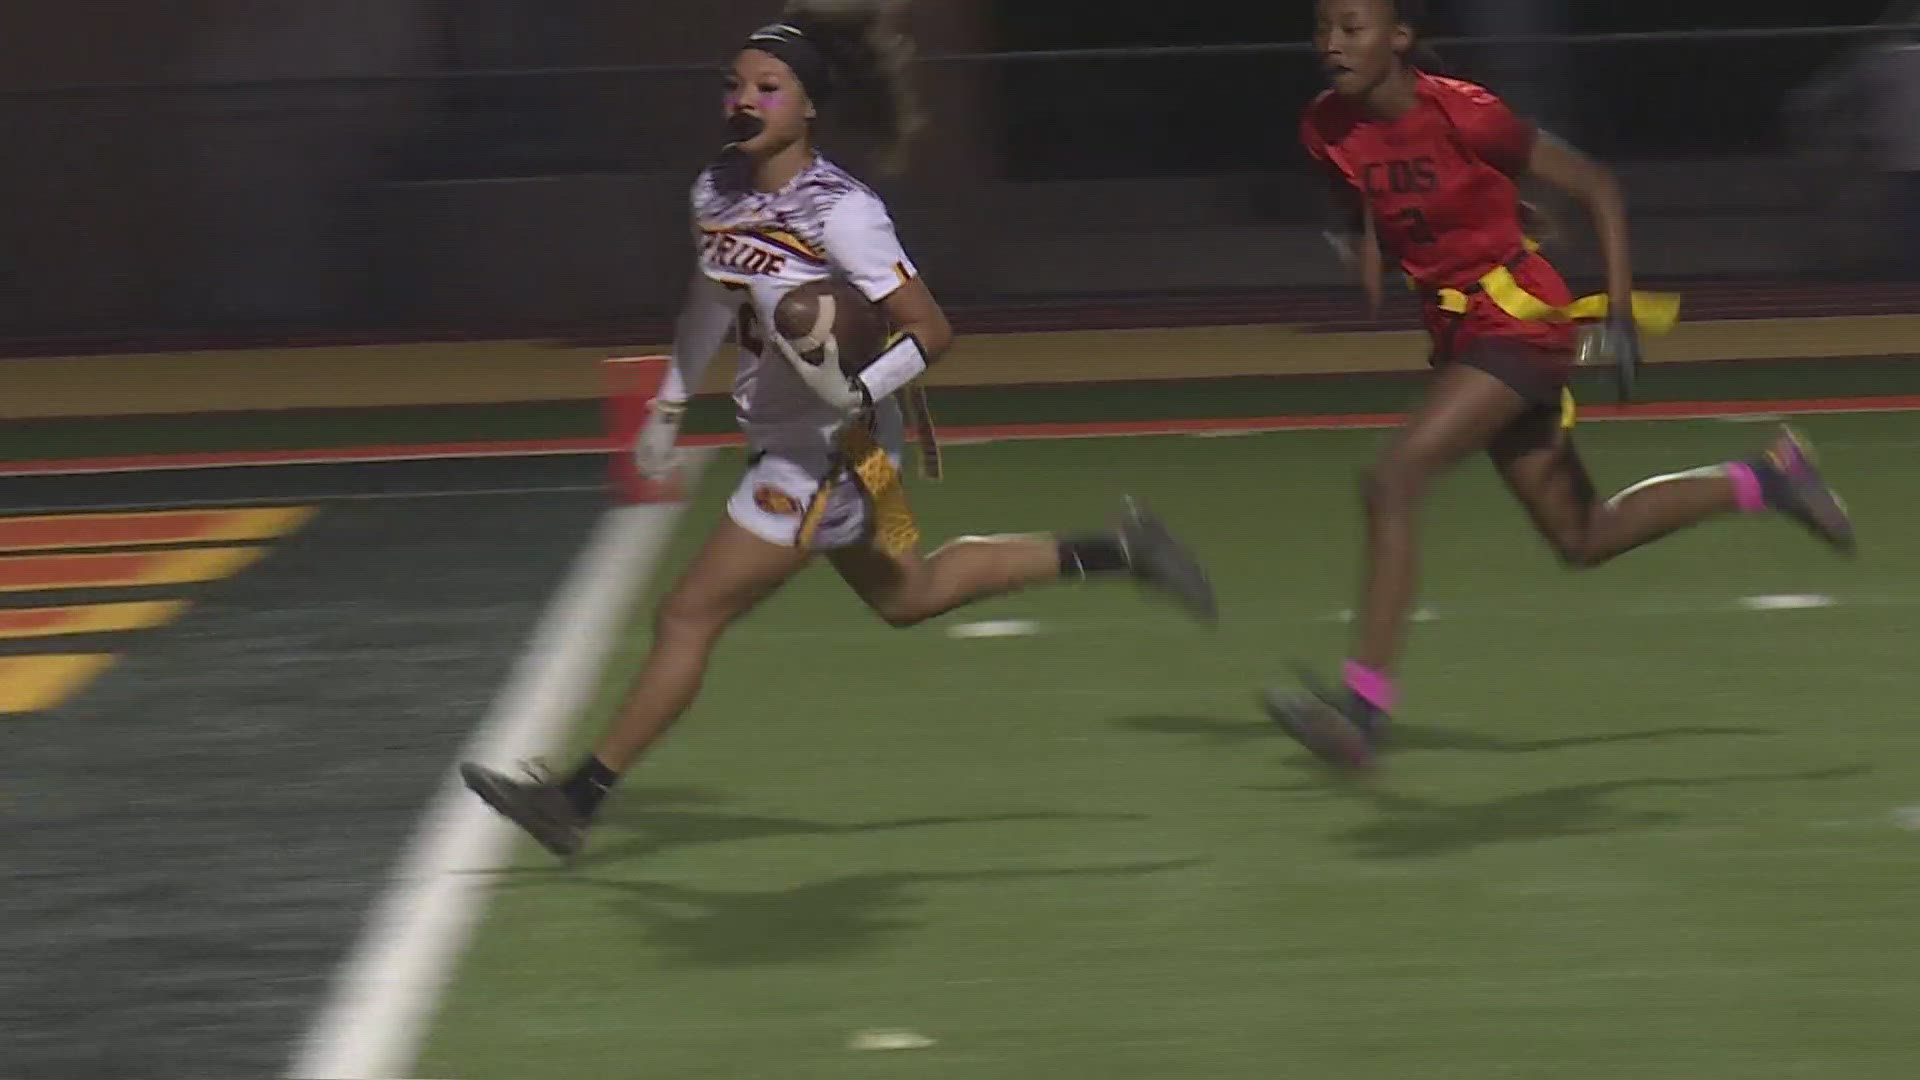 In our girls flag football game of the week, Mountain Pointe beat Corona del Sol, 21-0